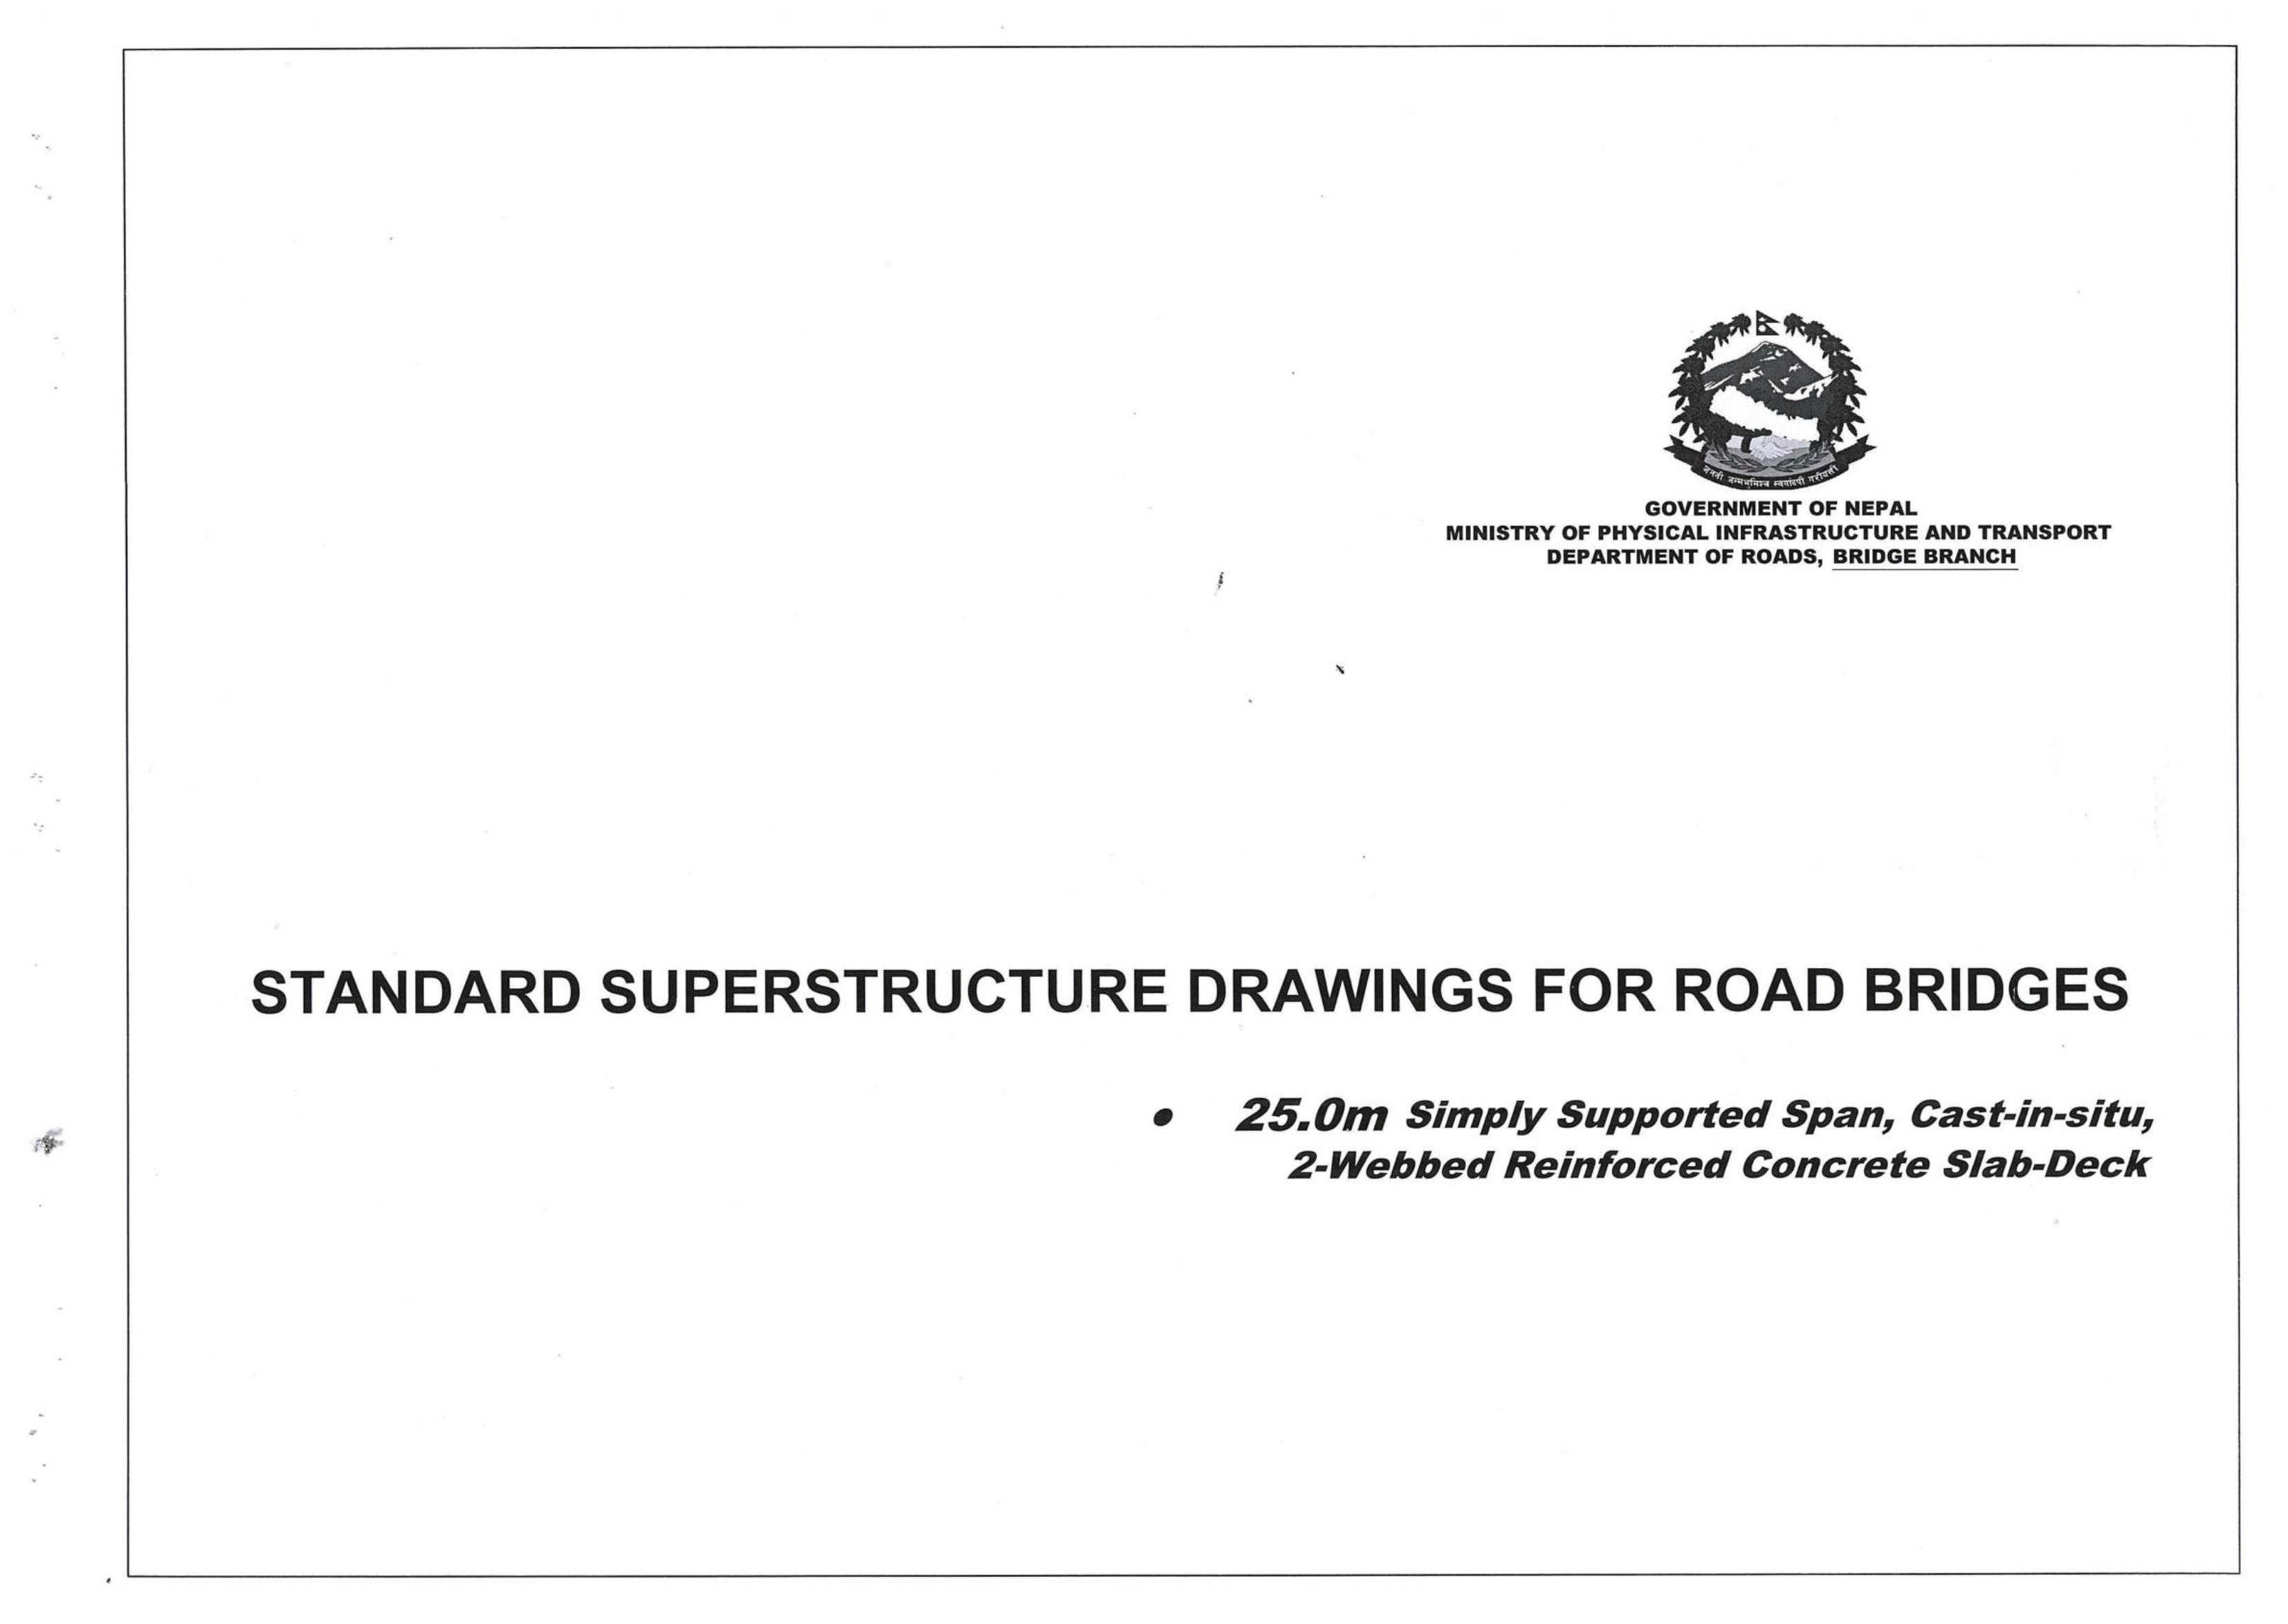 standard-superstructure-drawings-for-road-bridges-25-0m-simply-supported-span-cast-in-situ-2